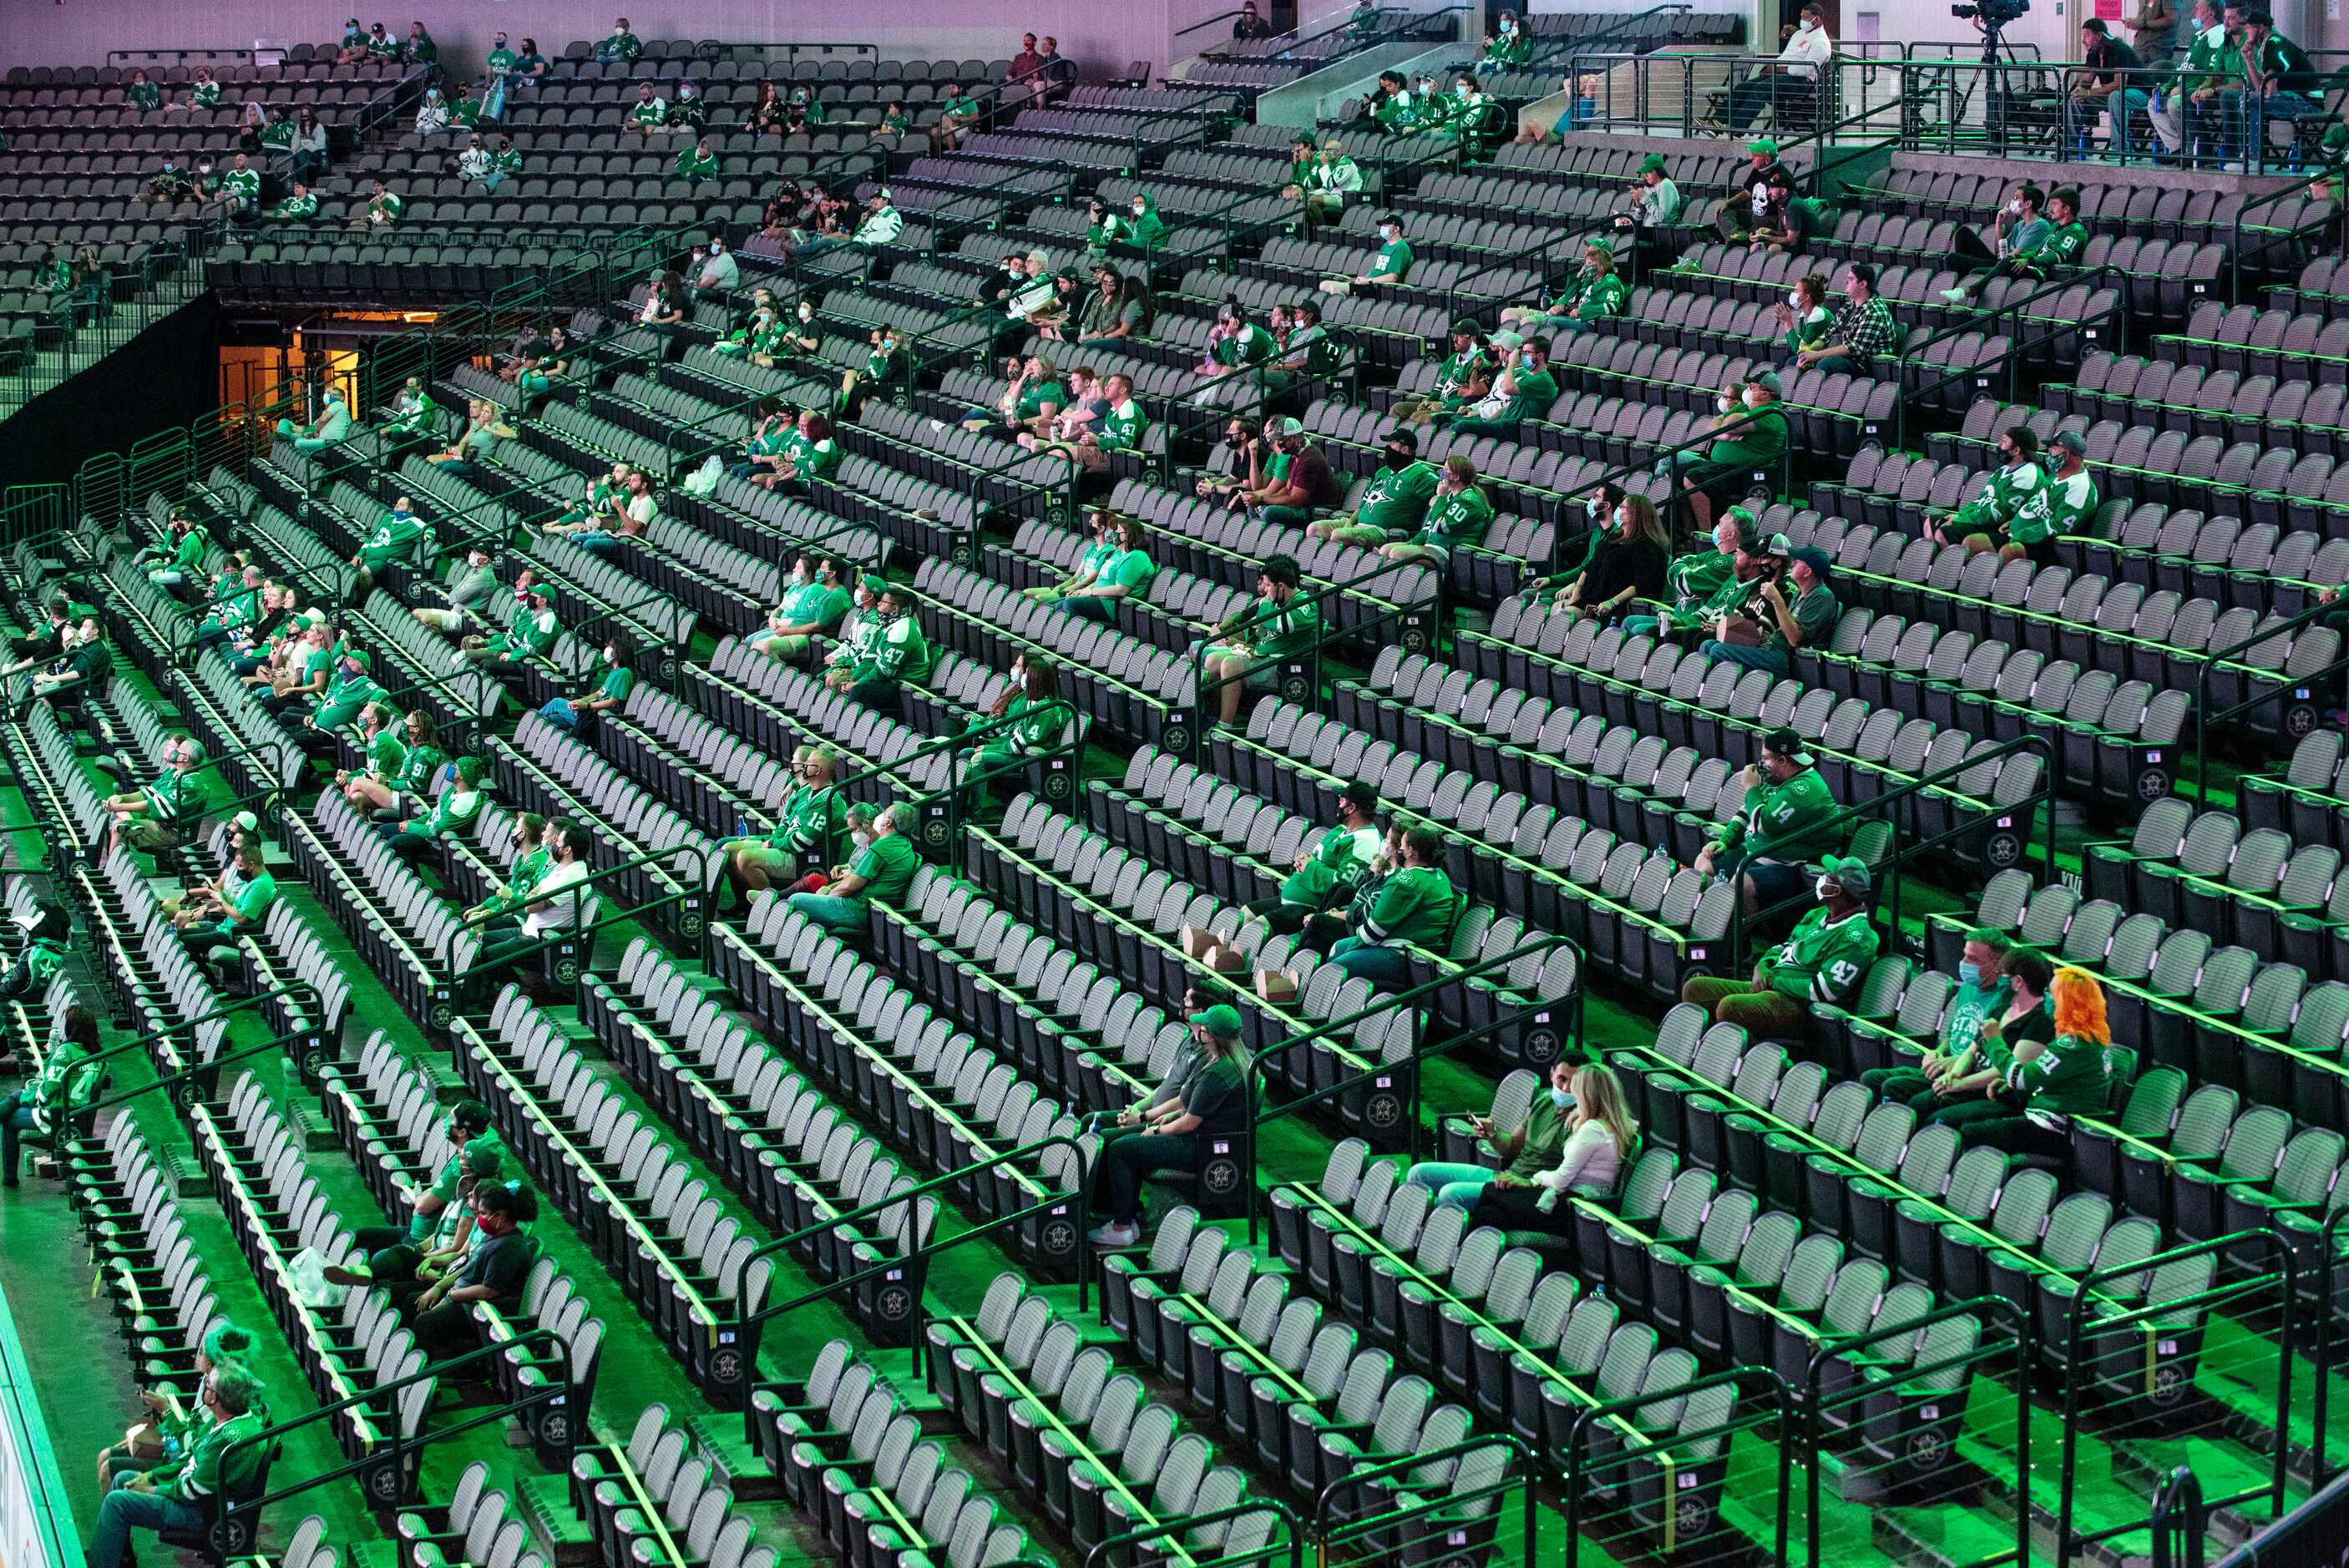 Fans sit in social distance sections as they wait for the start of period 2 during a watch...